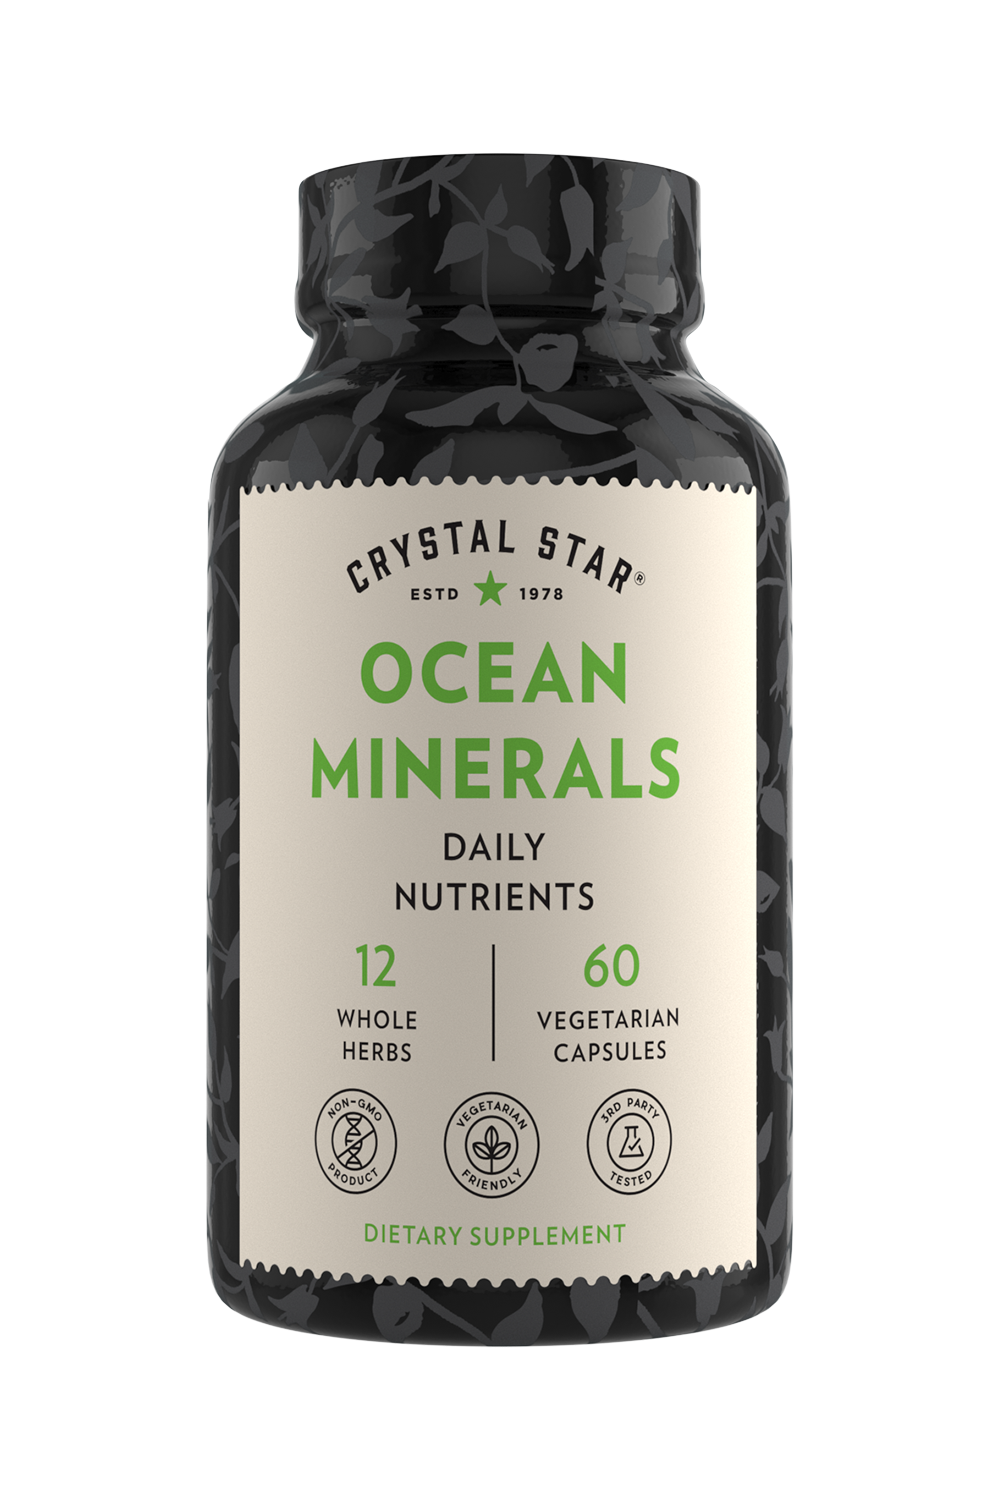 Crystal Star Ocean Minerals supplement for daily nutrients, Front Side